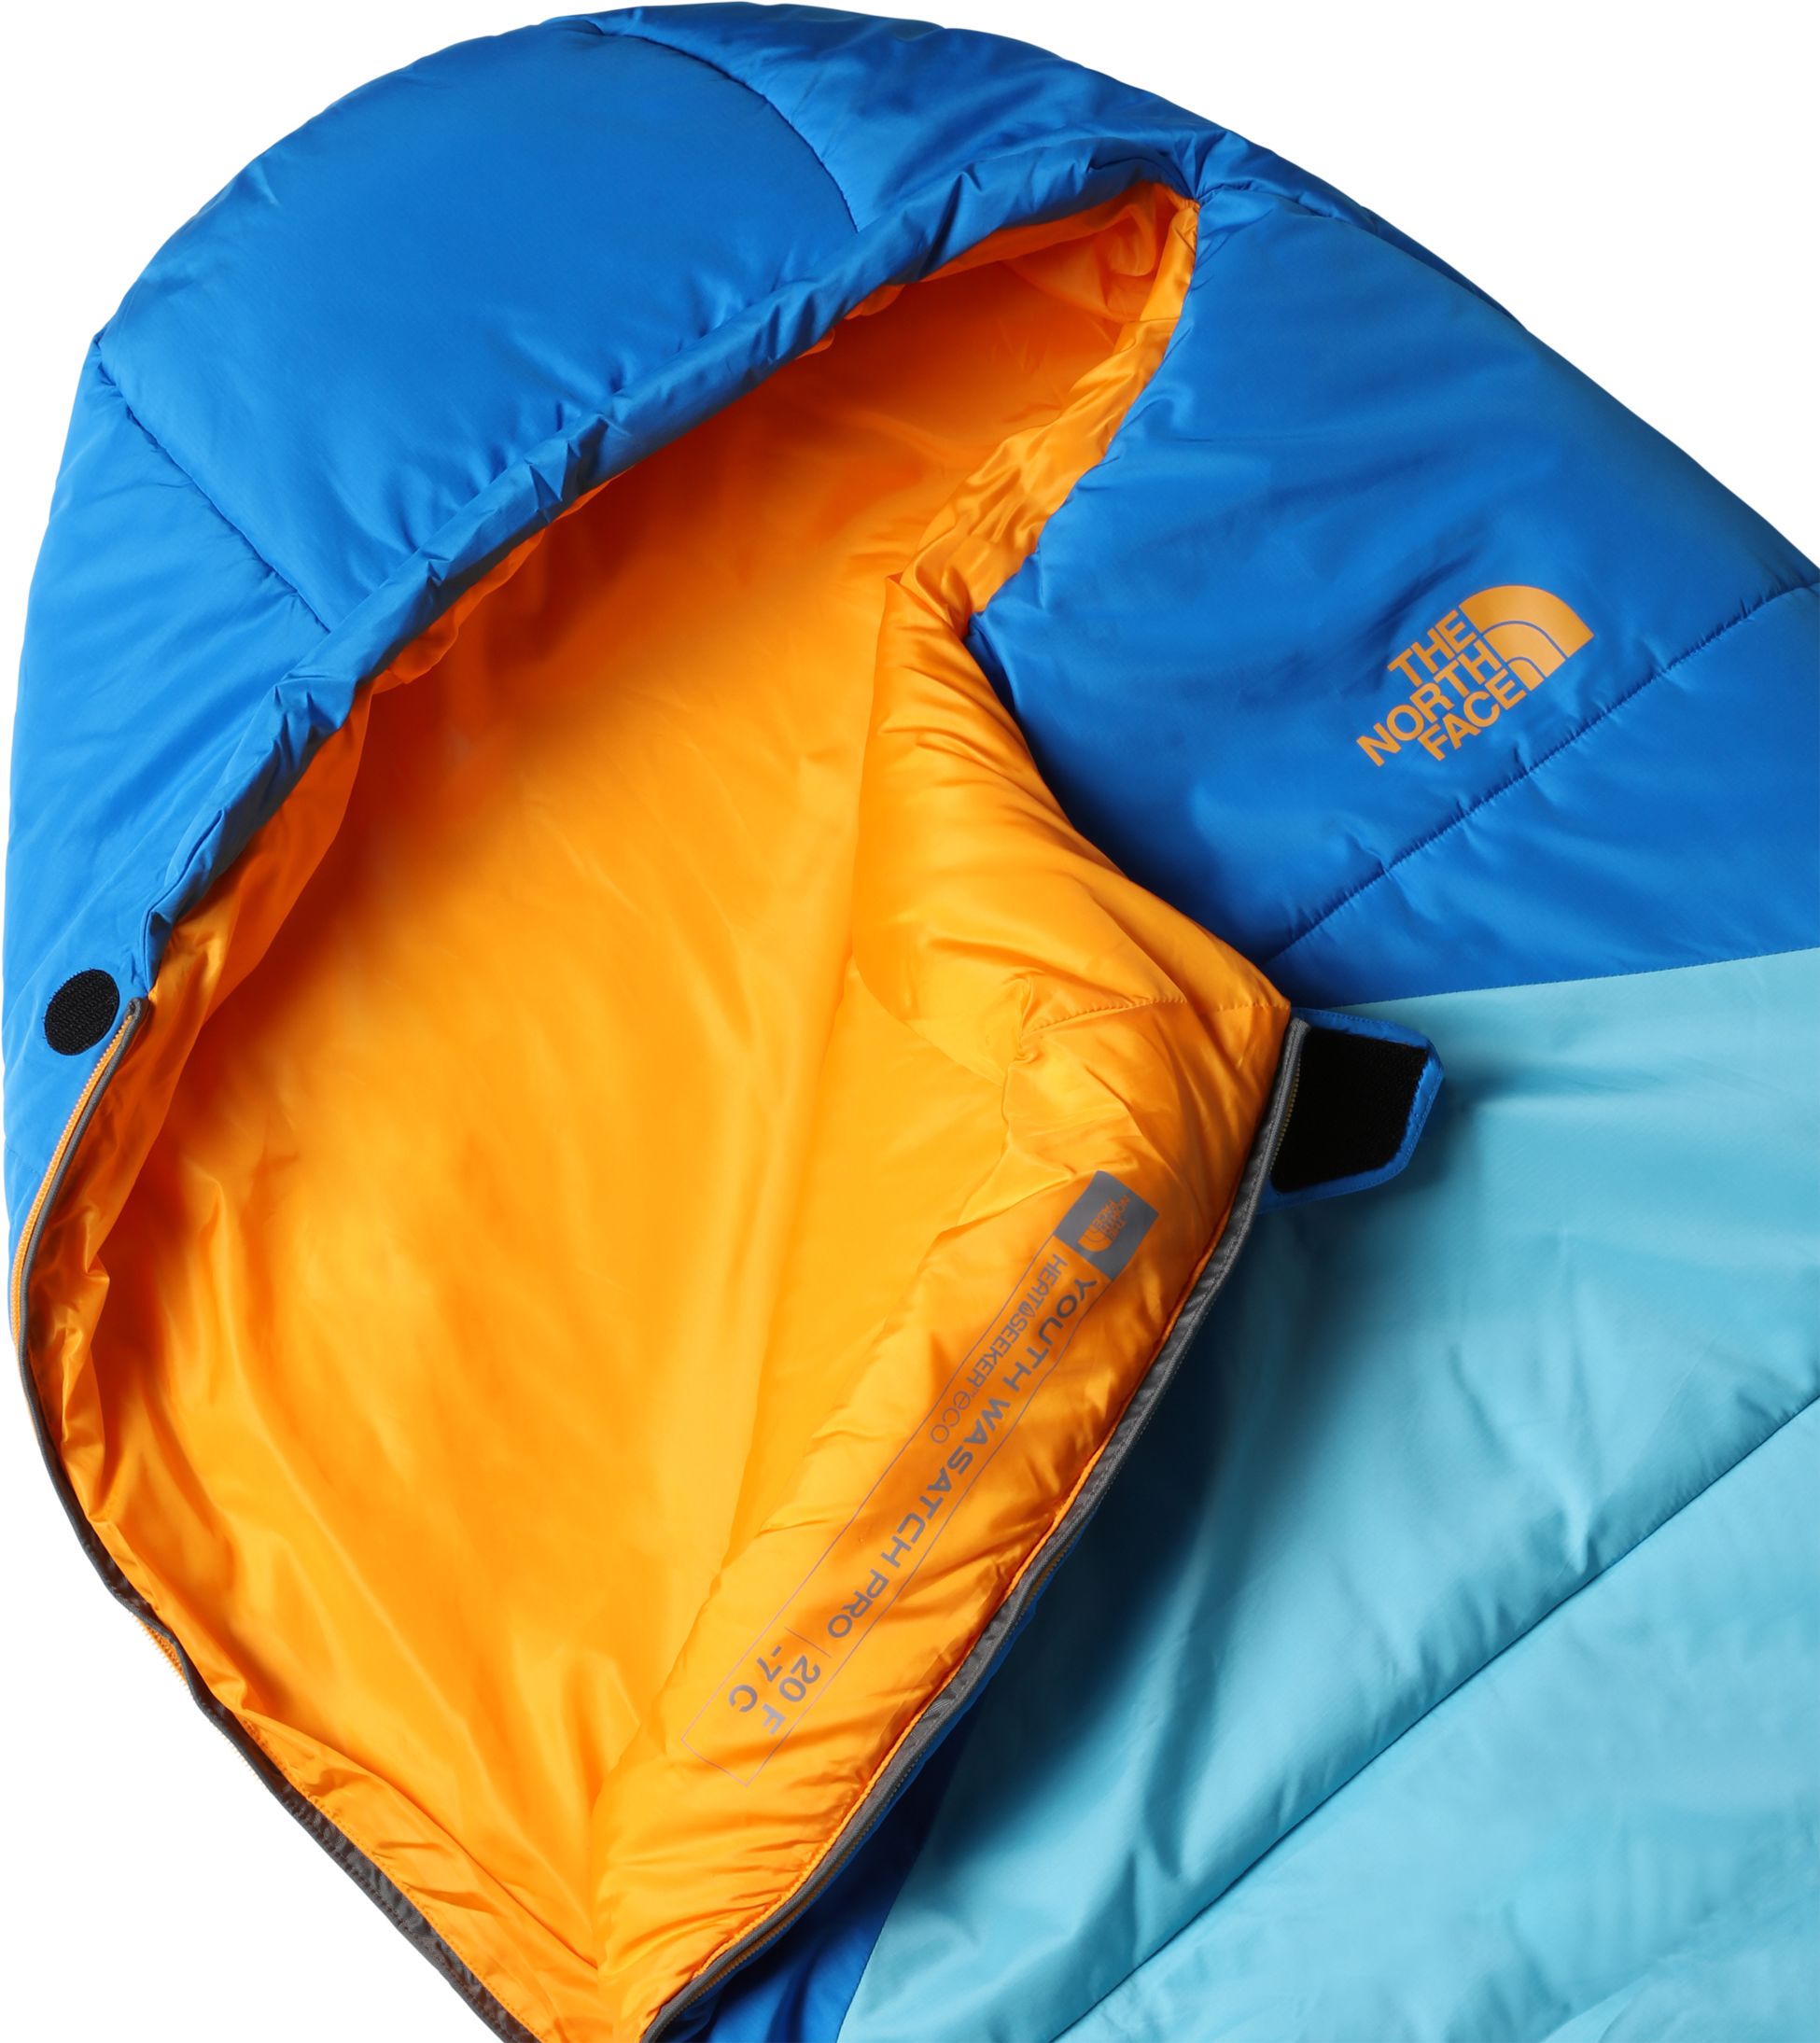 THE NORTH FACE, Y WASATCH PRO 20